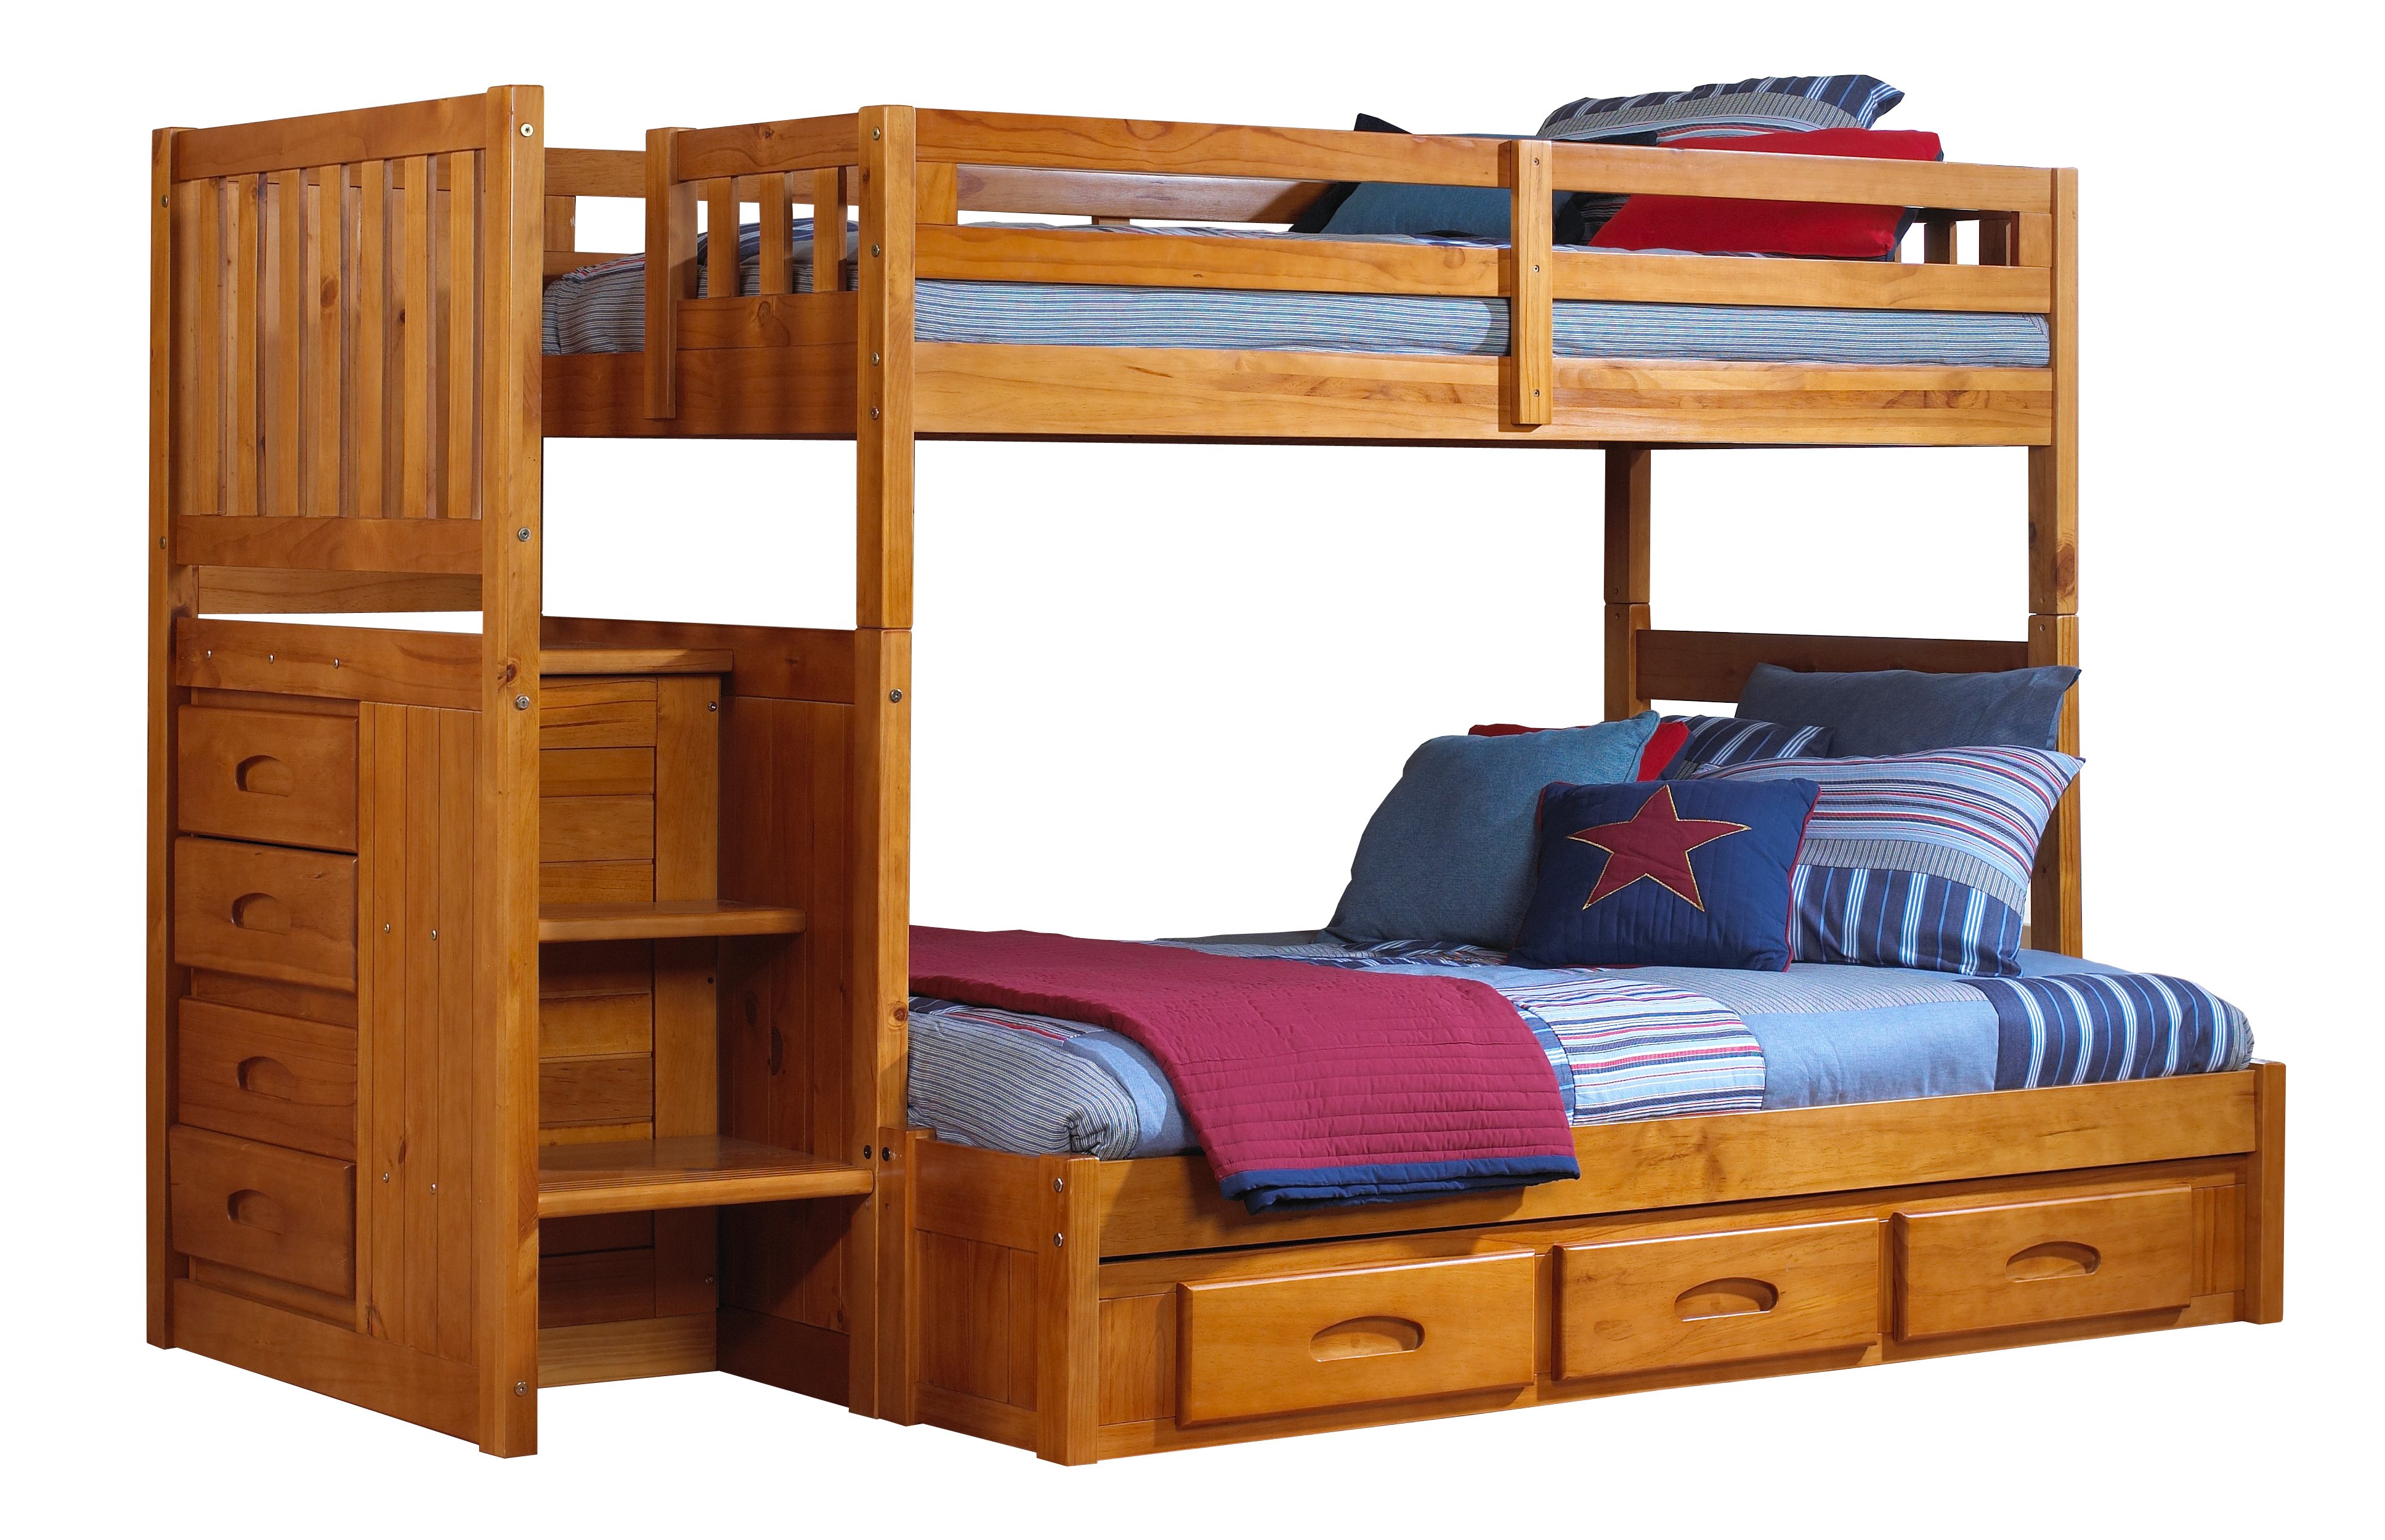 Honey Staircase Bunk Bed, Wooden Bunk Bed Connectors